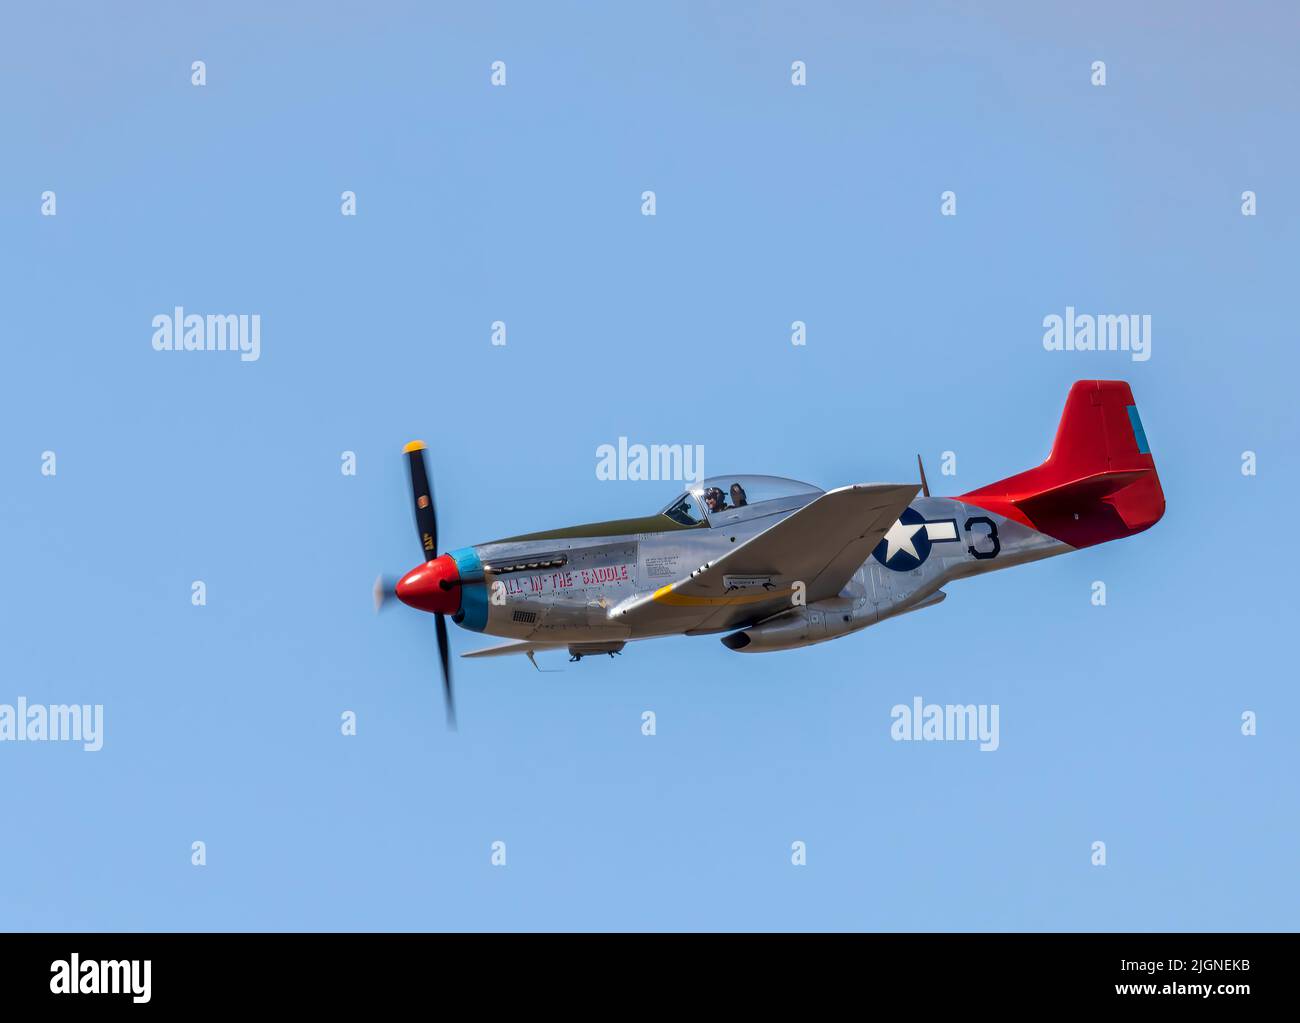 Tall In The Saddle, a P51D-20-NA model of the infamous P51 Mustang aircraft built for the United States Air Force, flying at Southport, Merseyside, UK Stock Photo